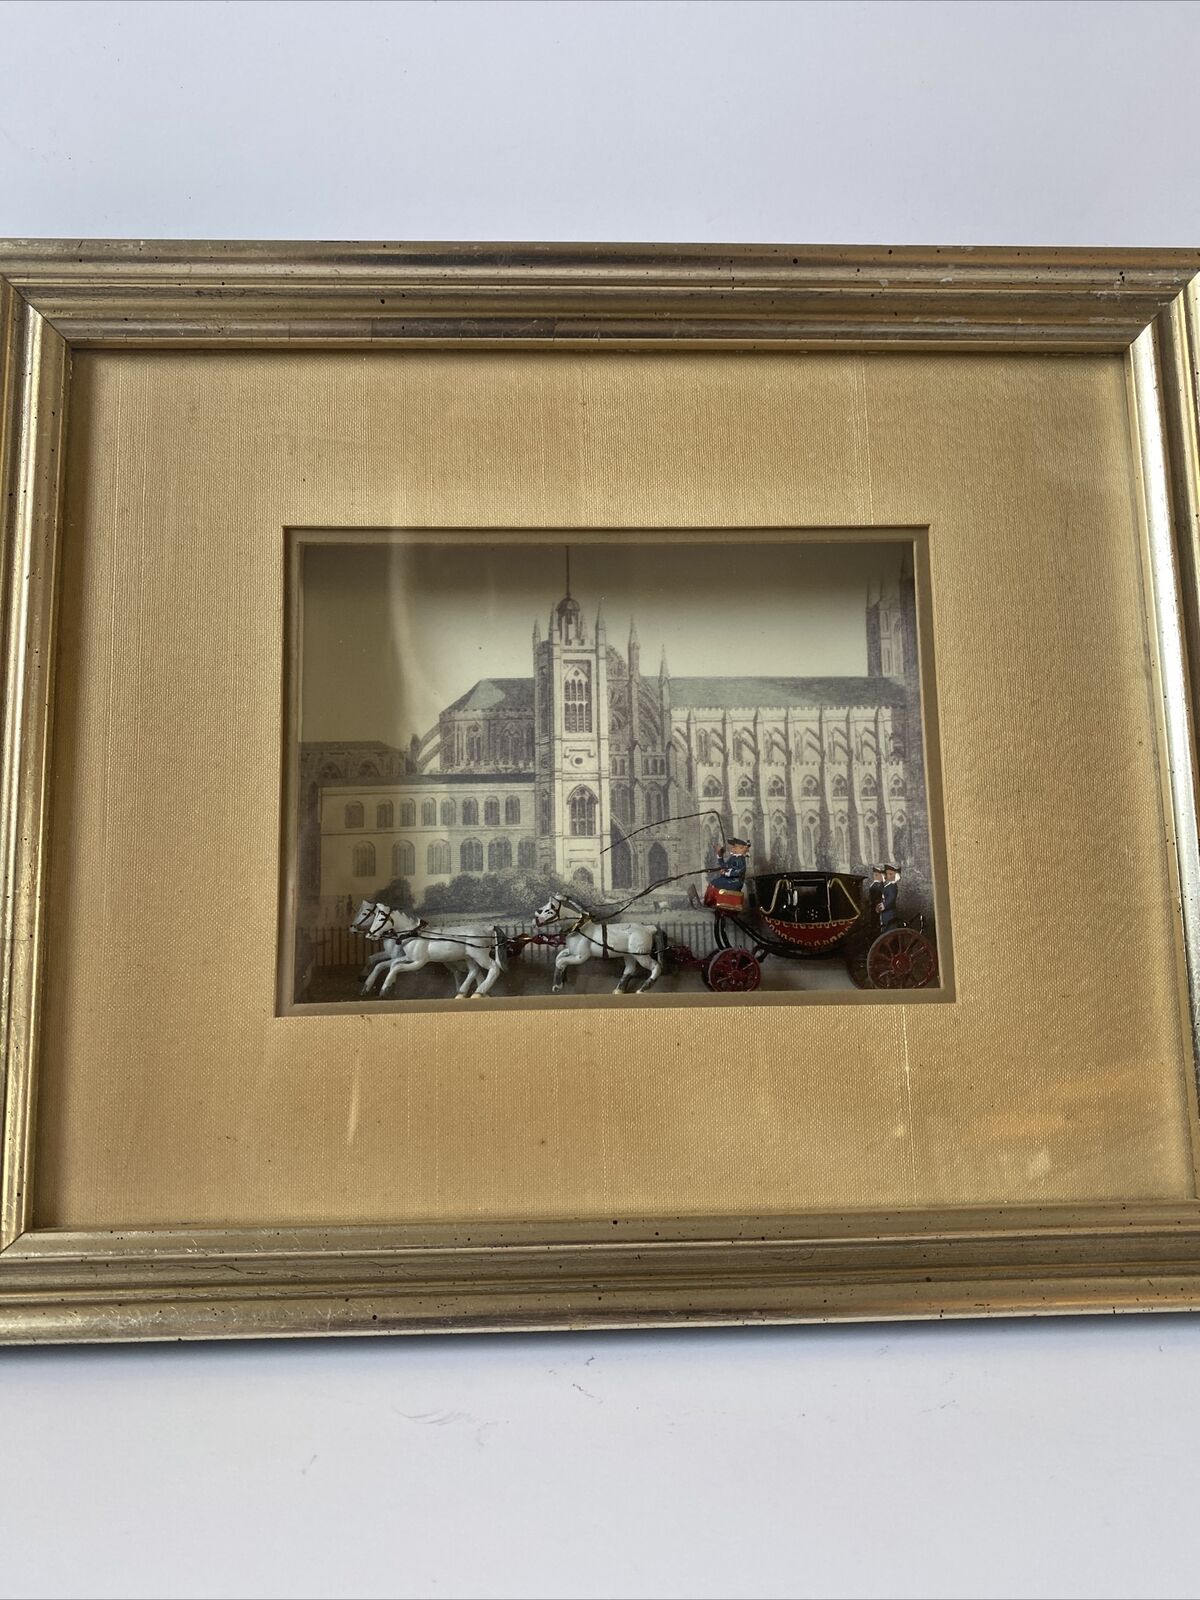 ANTIQUE GRAND BERLIN WESTMINSTER ABBEY DIORAMA FRAMED PICTURE FRENCH